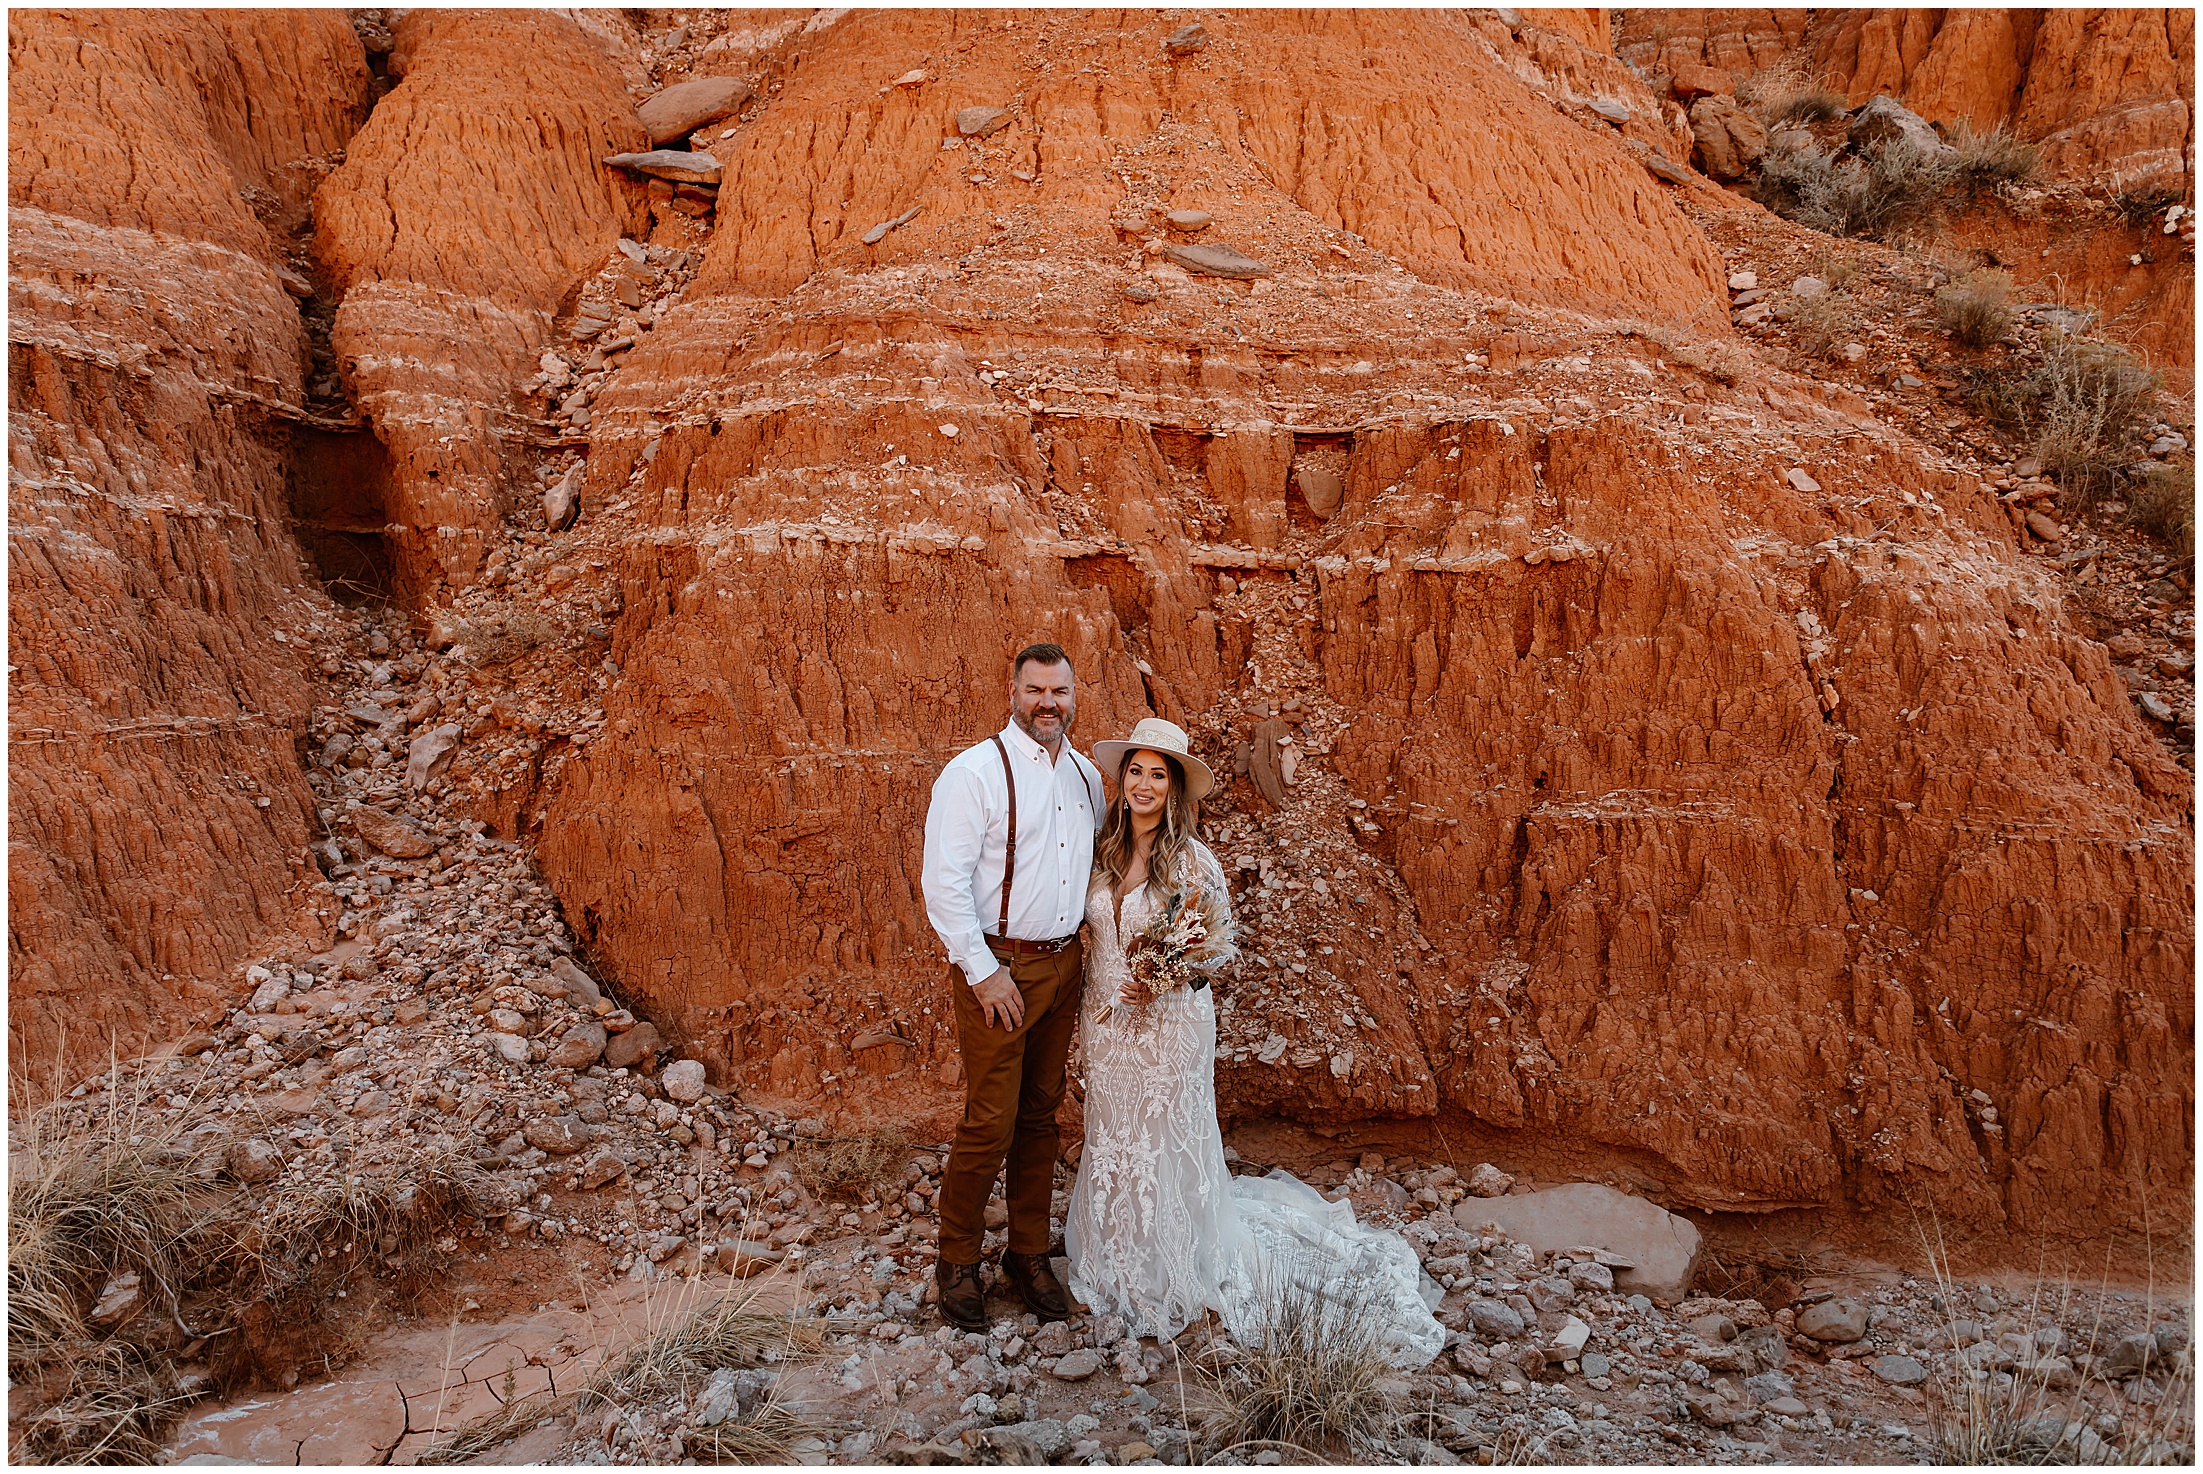 Palo Duro Canyon weddings, Palo Duro Canyon elopements, Texas wedding packages, Texas elopement packages, Unique Palo Duro Canyon venues, Scenic wedding locations in Palo Duro Canyon 